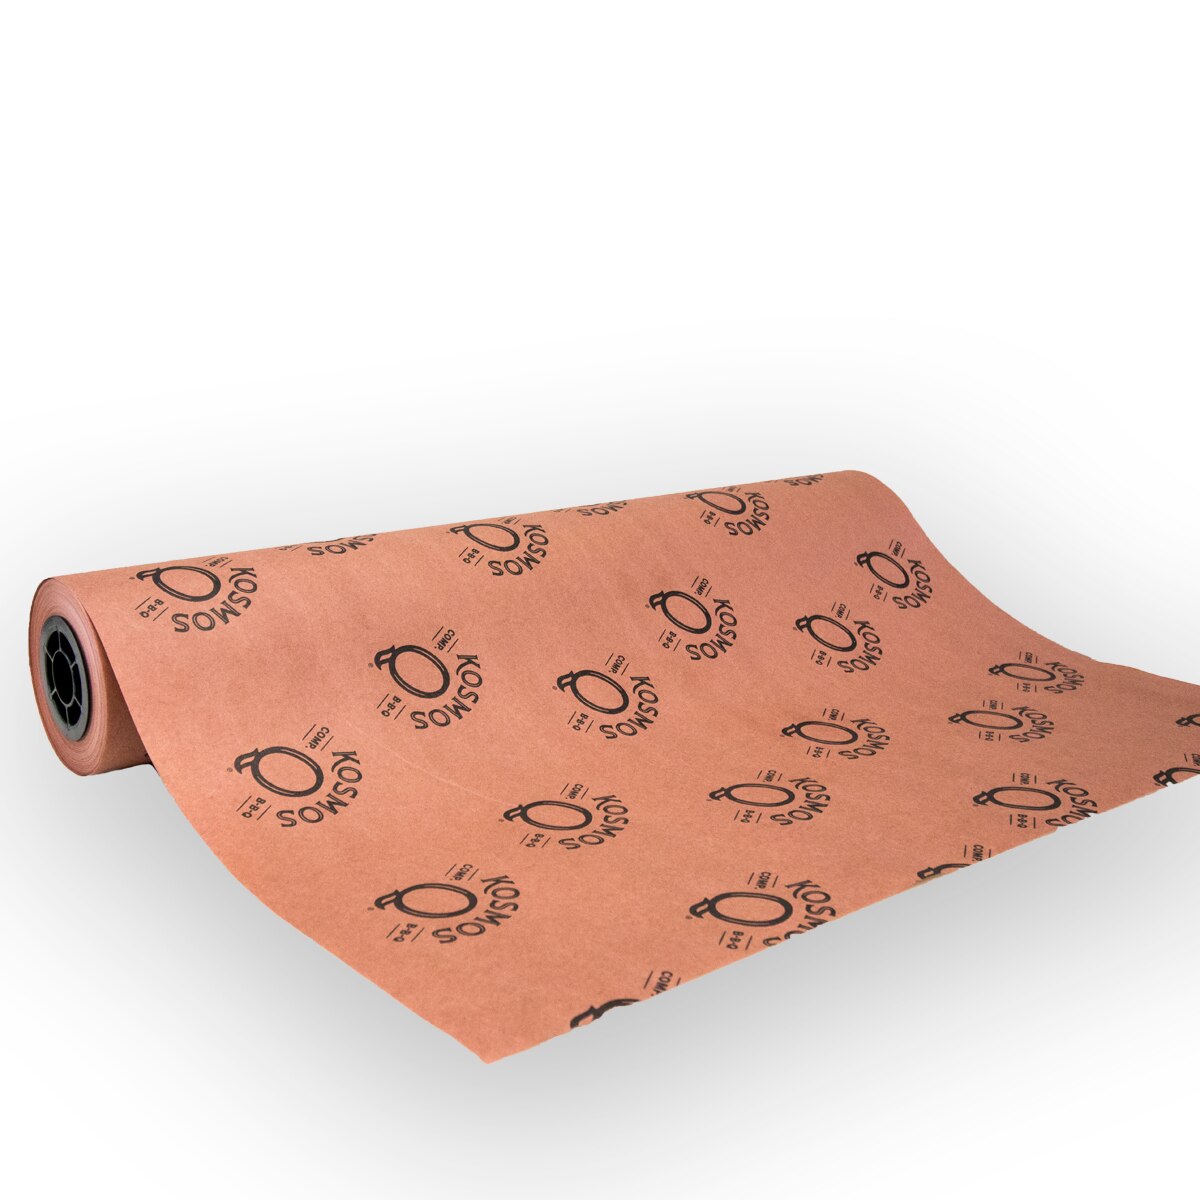 Bryco Goods Pink Butcher Paper Roll - 24 Inch by 175 Foot Roll of Food  Grade Peach Butcher Paper for Smoking Meat - Unbleached, Unwaxed and  Uncoated